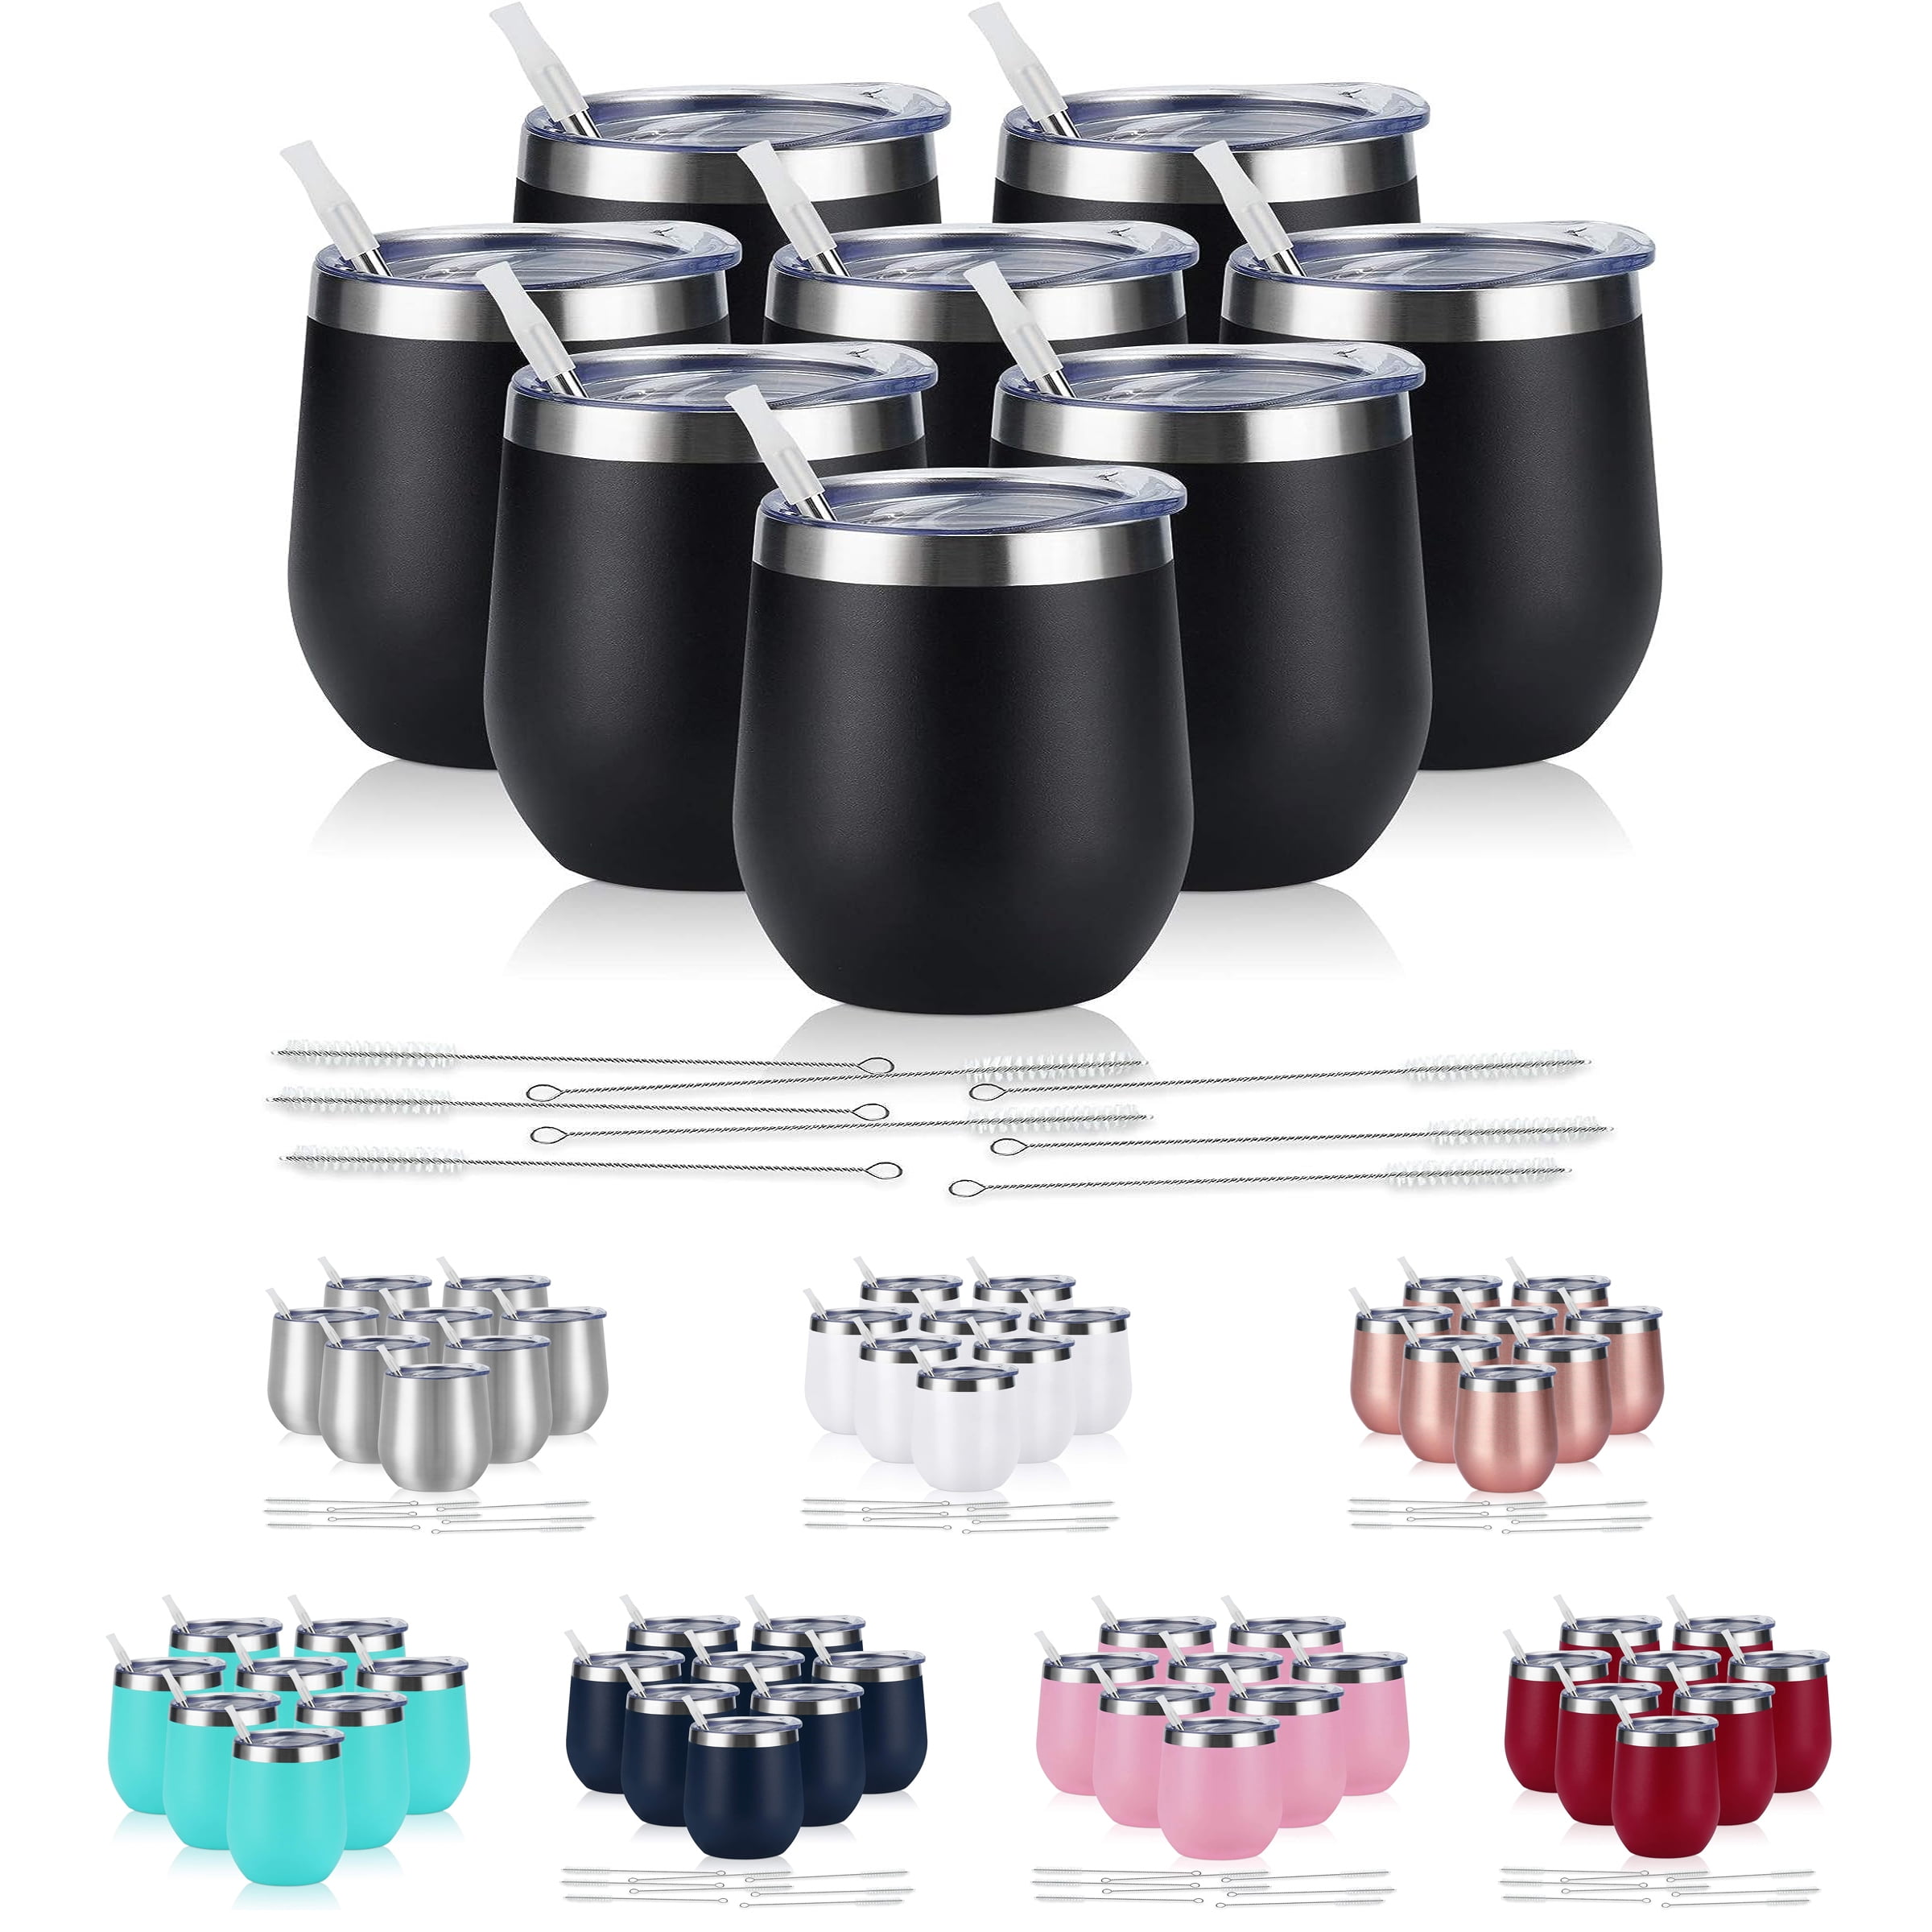 Pack of 6] Stainless Steel Wine Tumbler Bulk with Lid, Insulated 12 oz Pink